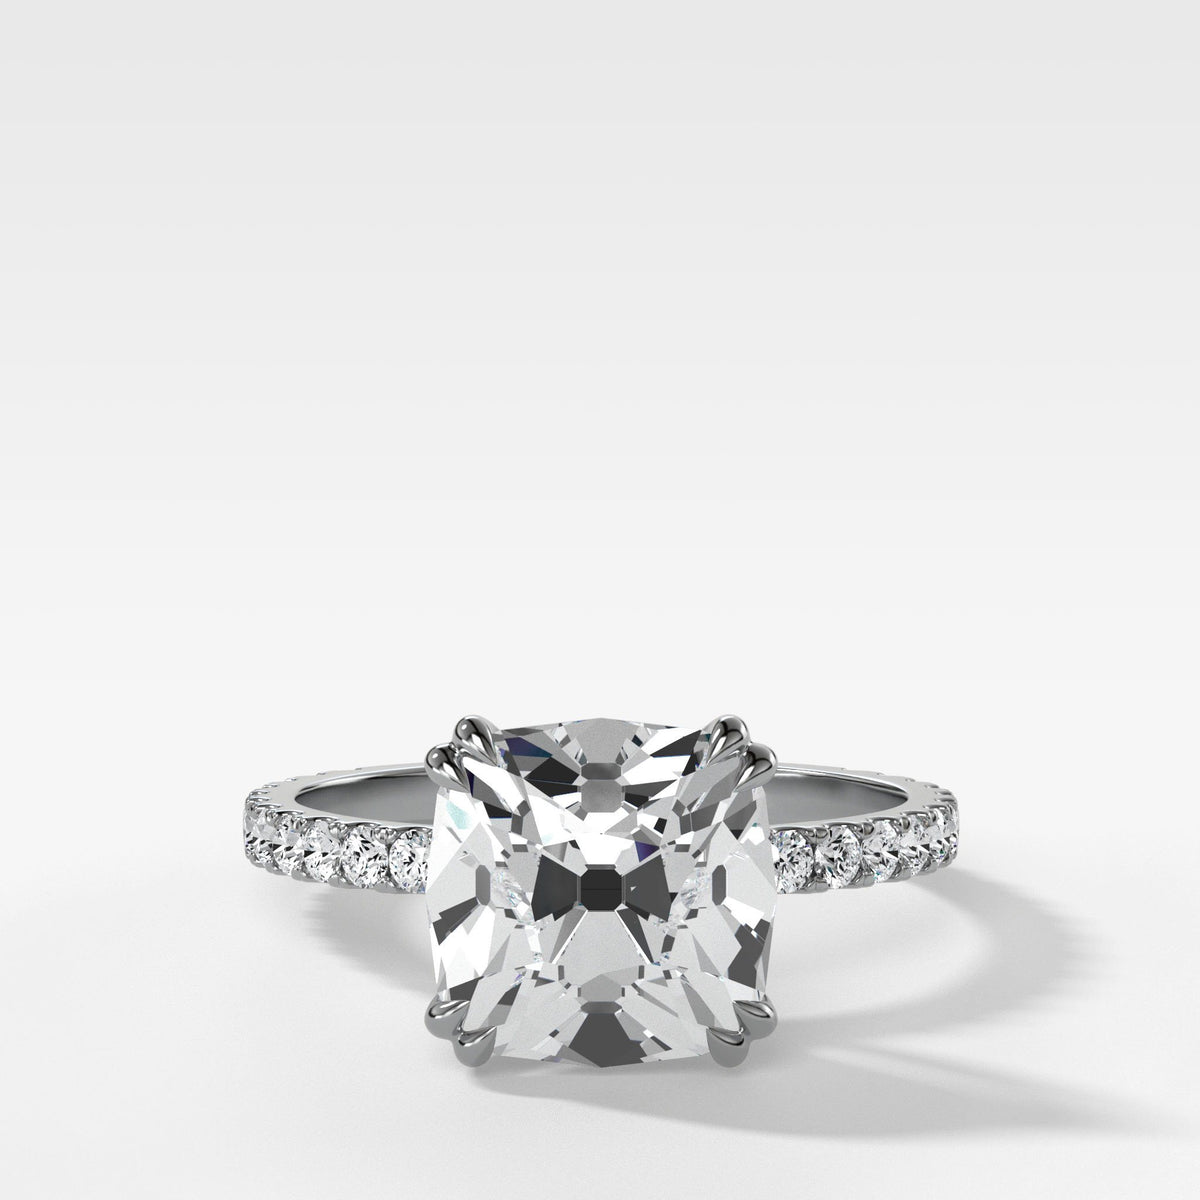 Signature Pave Engagement Ring With Old Mine Cut by Good Stone in White Gold